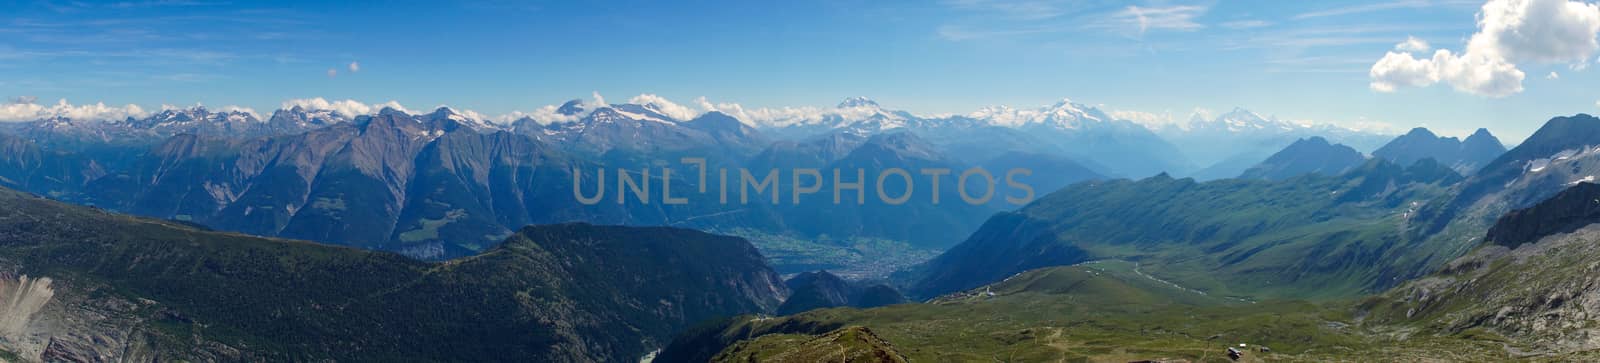 A panorama of the mountains in the Valais, Switzerland